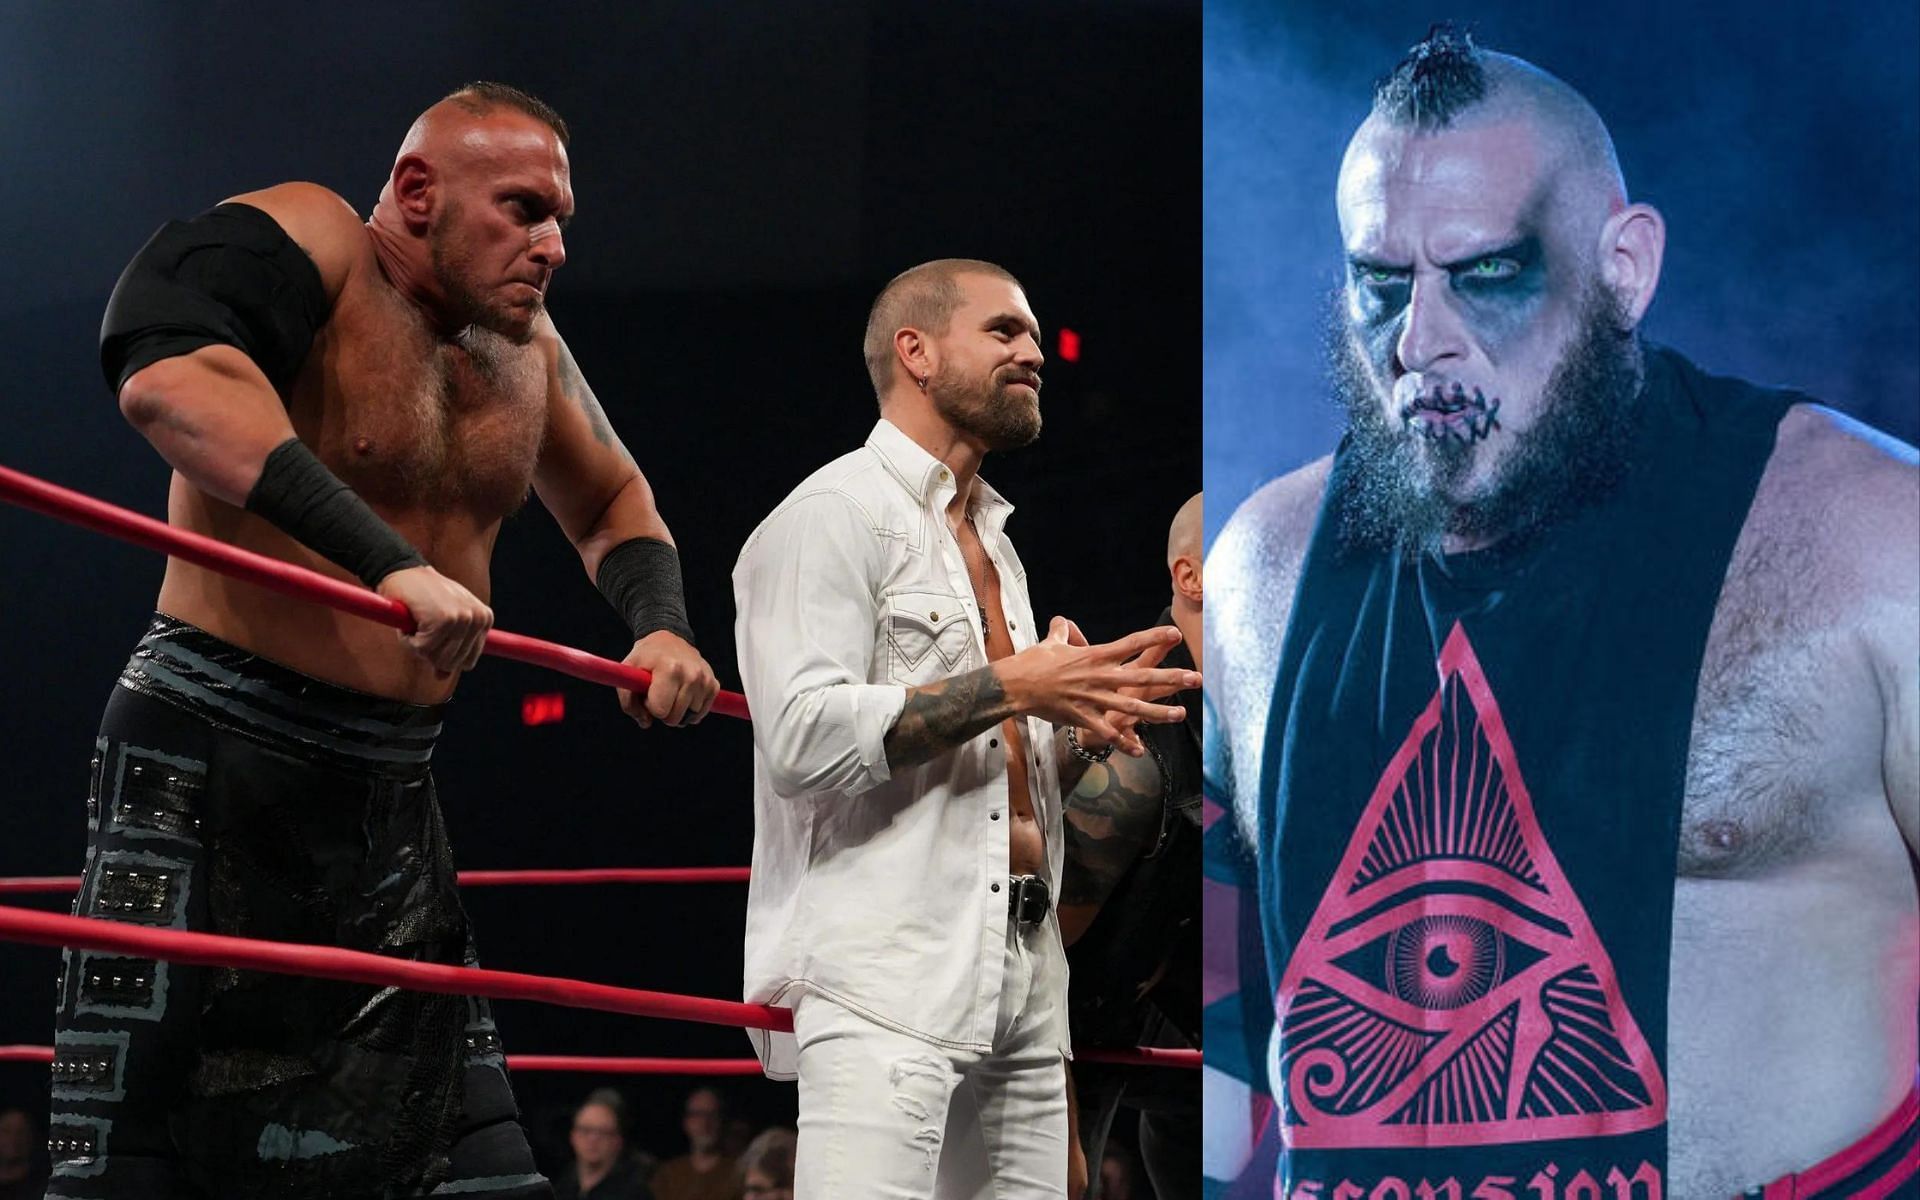 The Ascension had so much untapped potential with WWE!